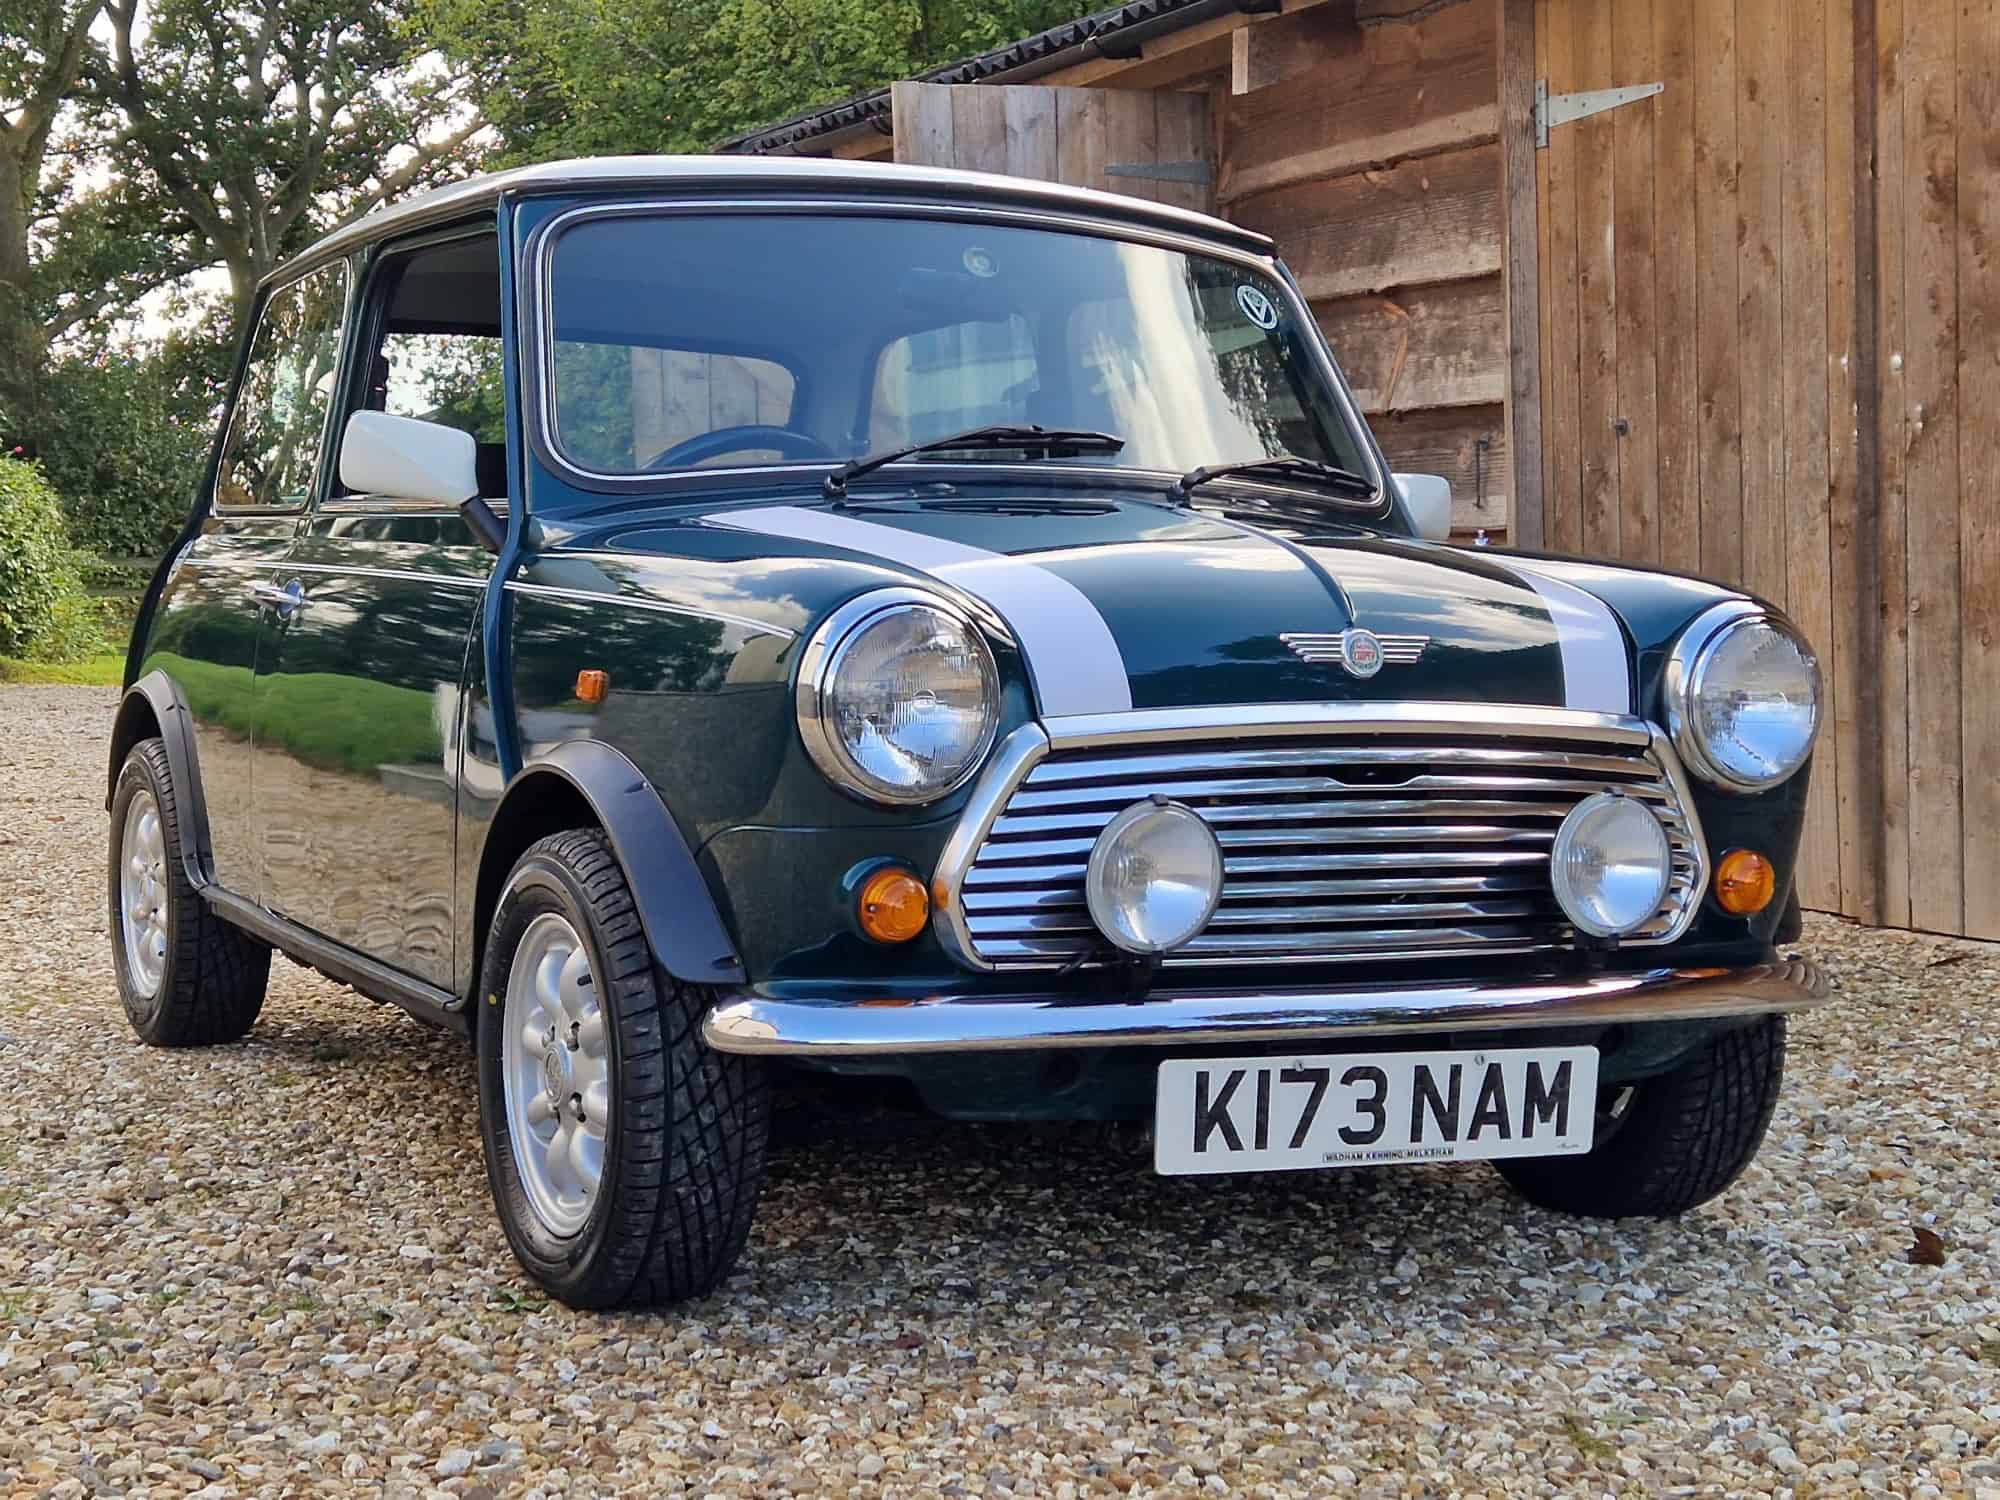 ** NOW SOLD ** 1992 Rover Mini Cooper On Just 22200 Miles from New. Last Owner 26 Years!